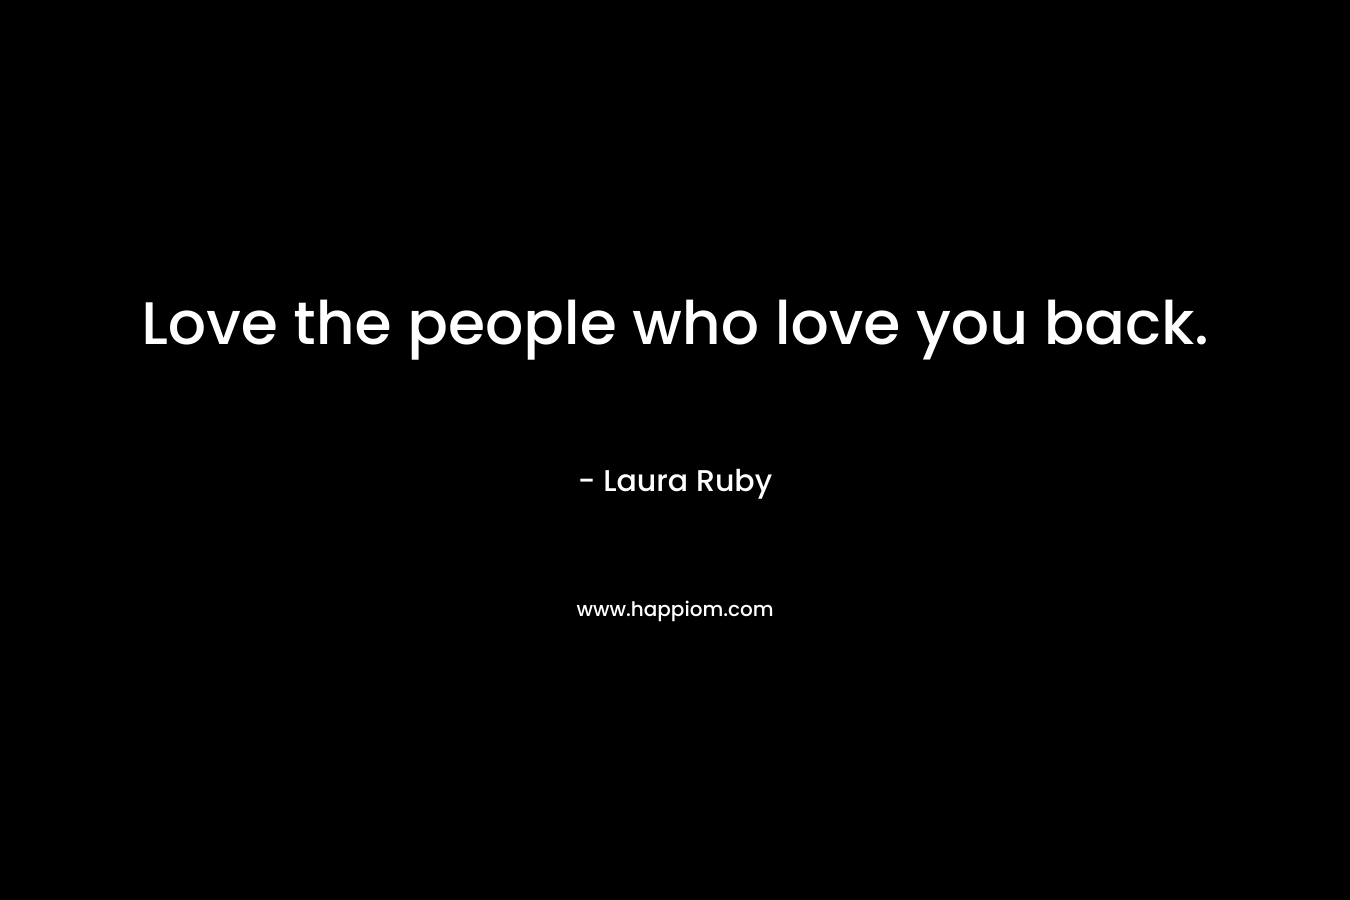 Love the people who love you back.